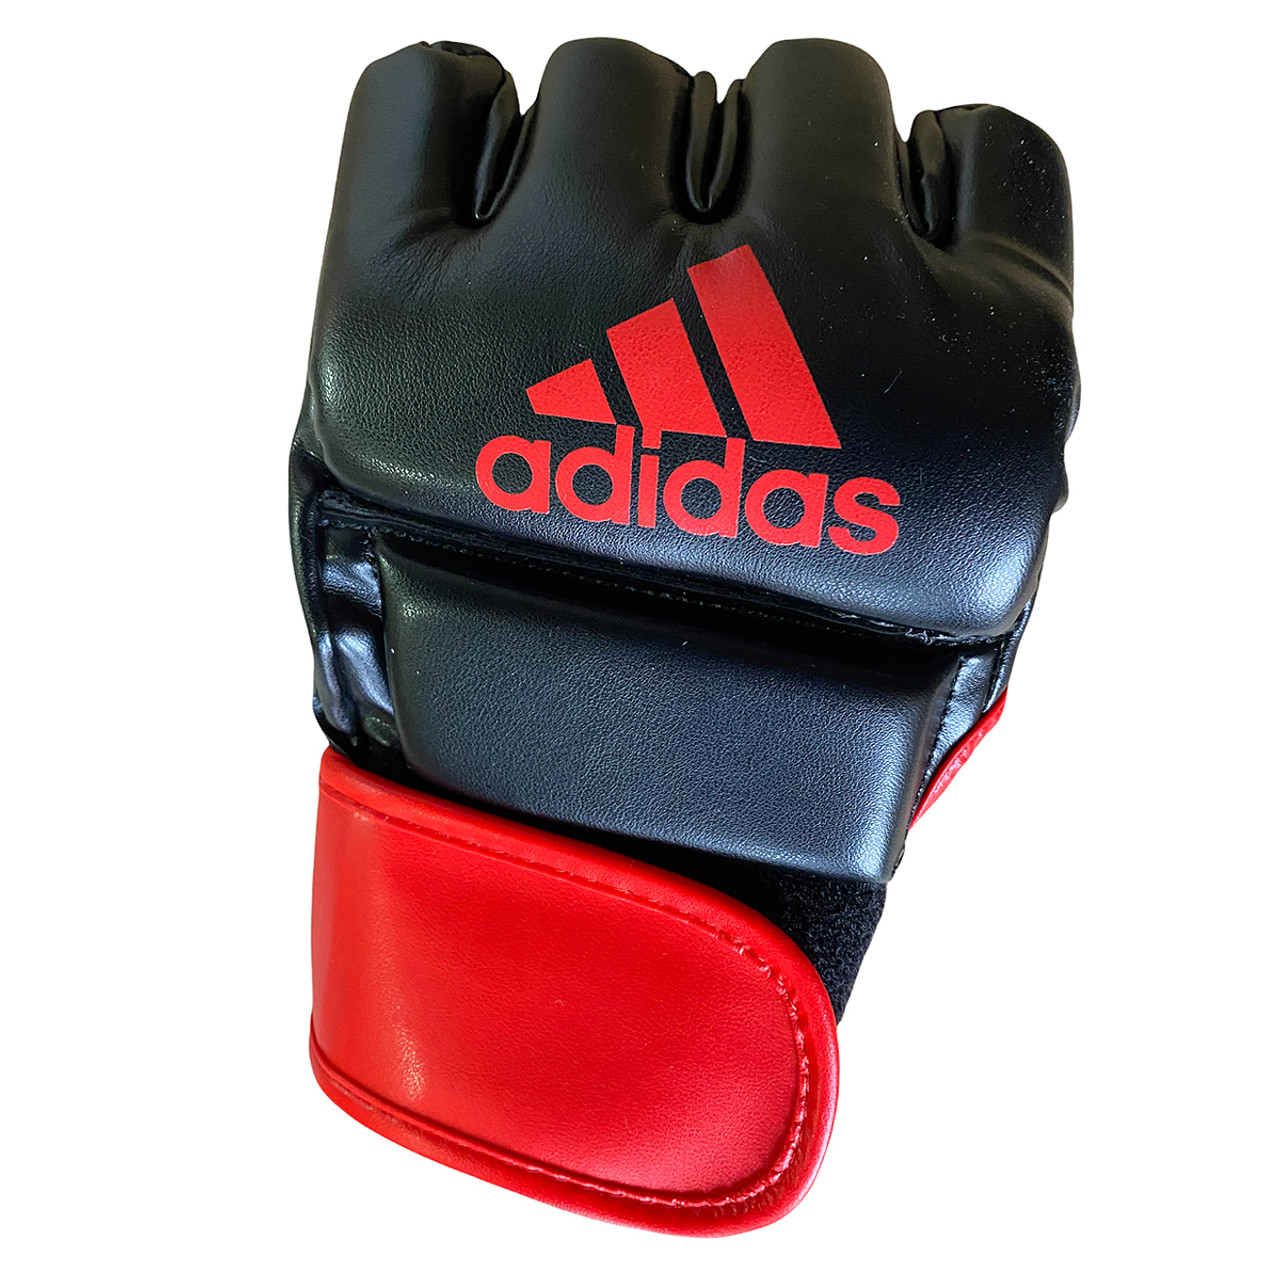 Training MMA/Kickboxing/Workout Grapping adidas Mitts